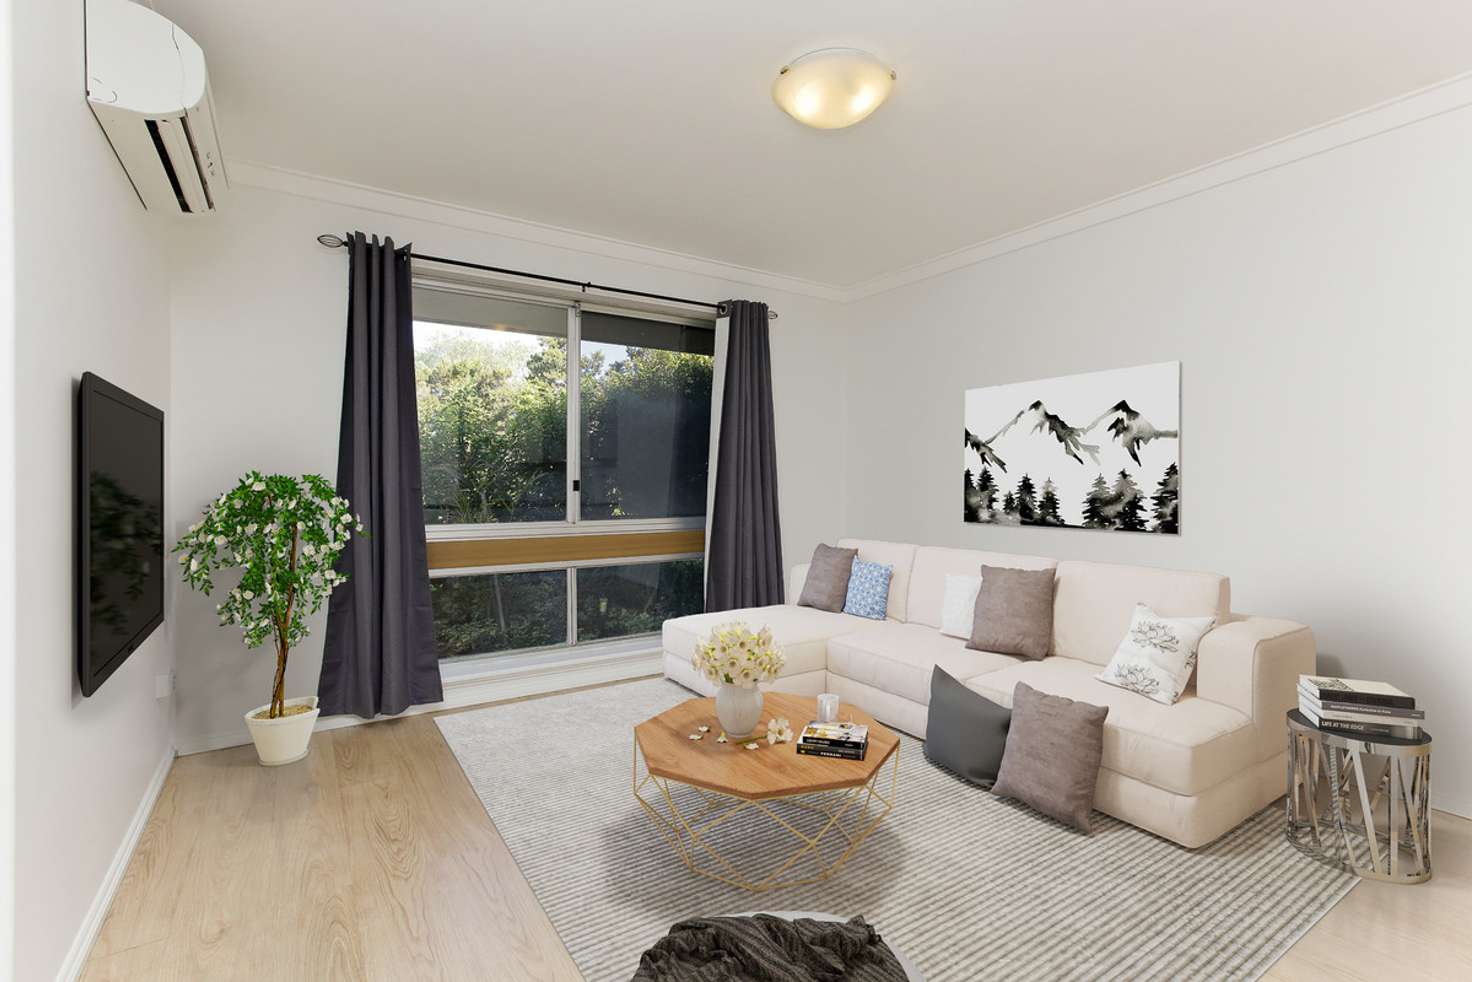 Main view of Homely unit listing, 9/164 Solomon Street, Beaconsfield WA 6162